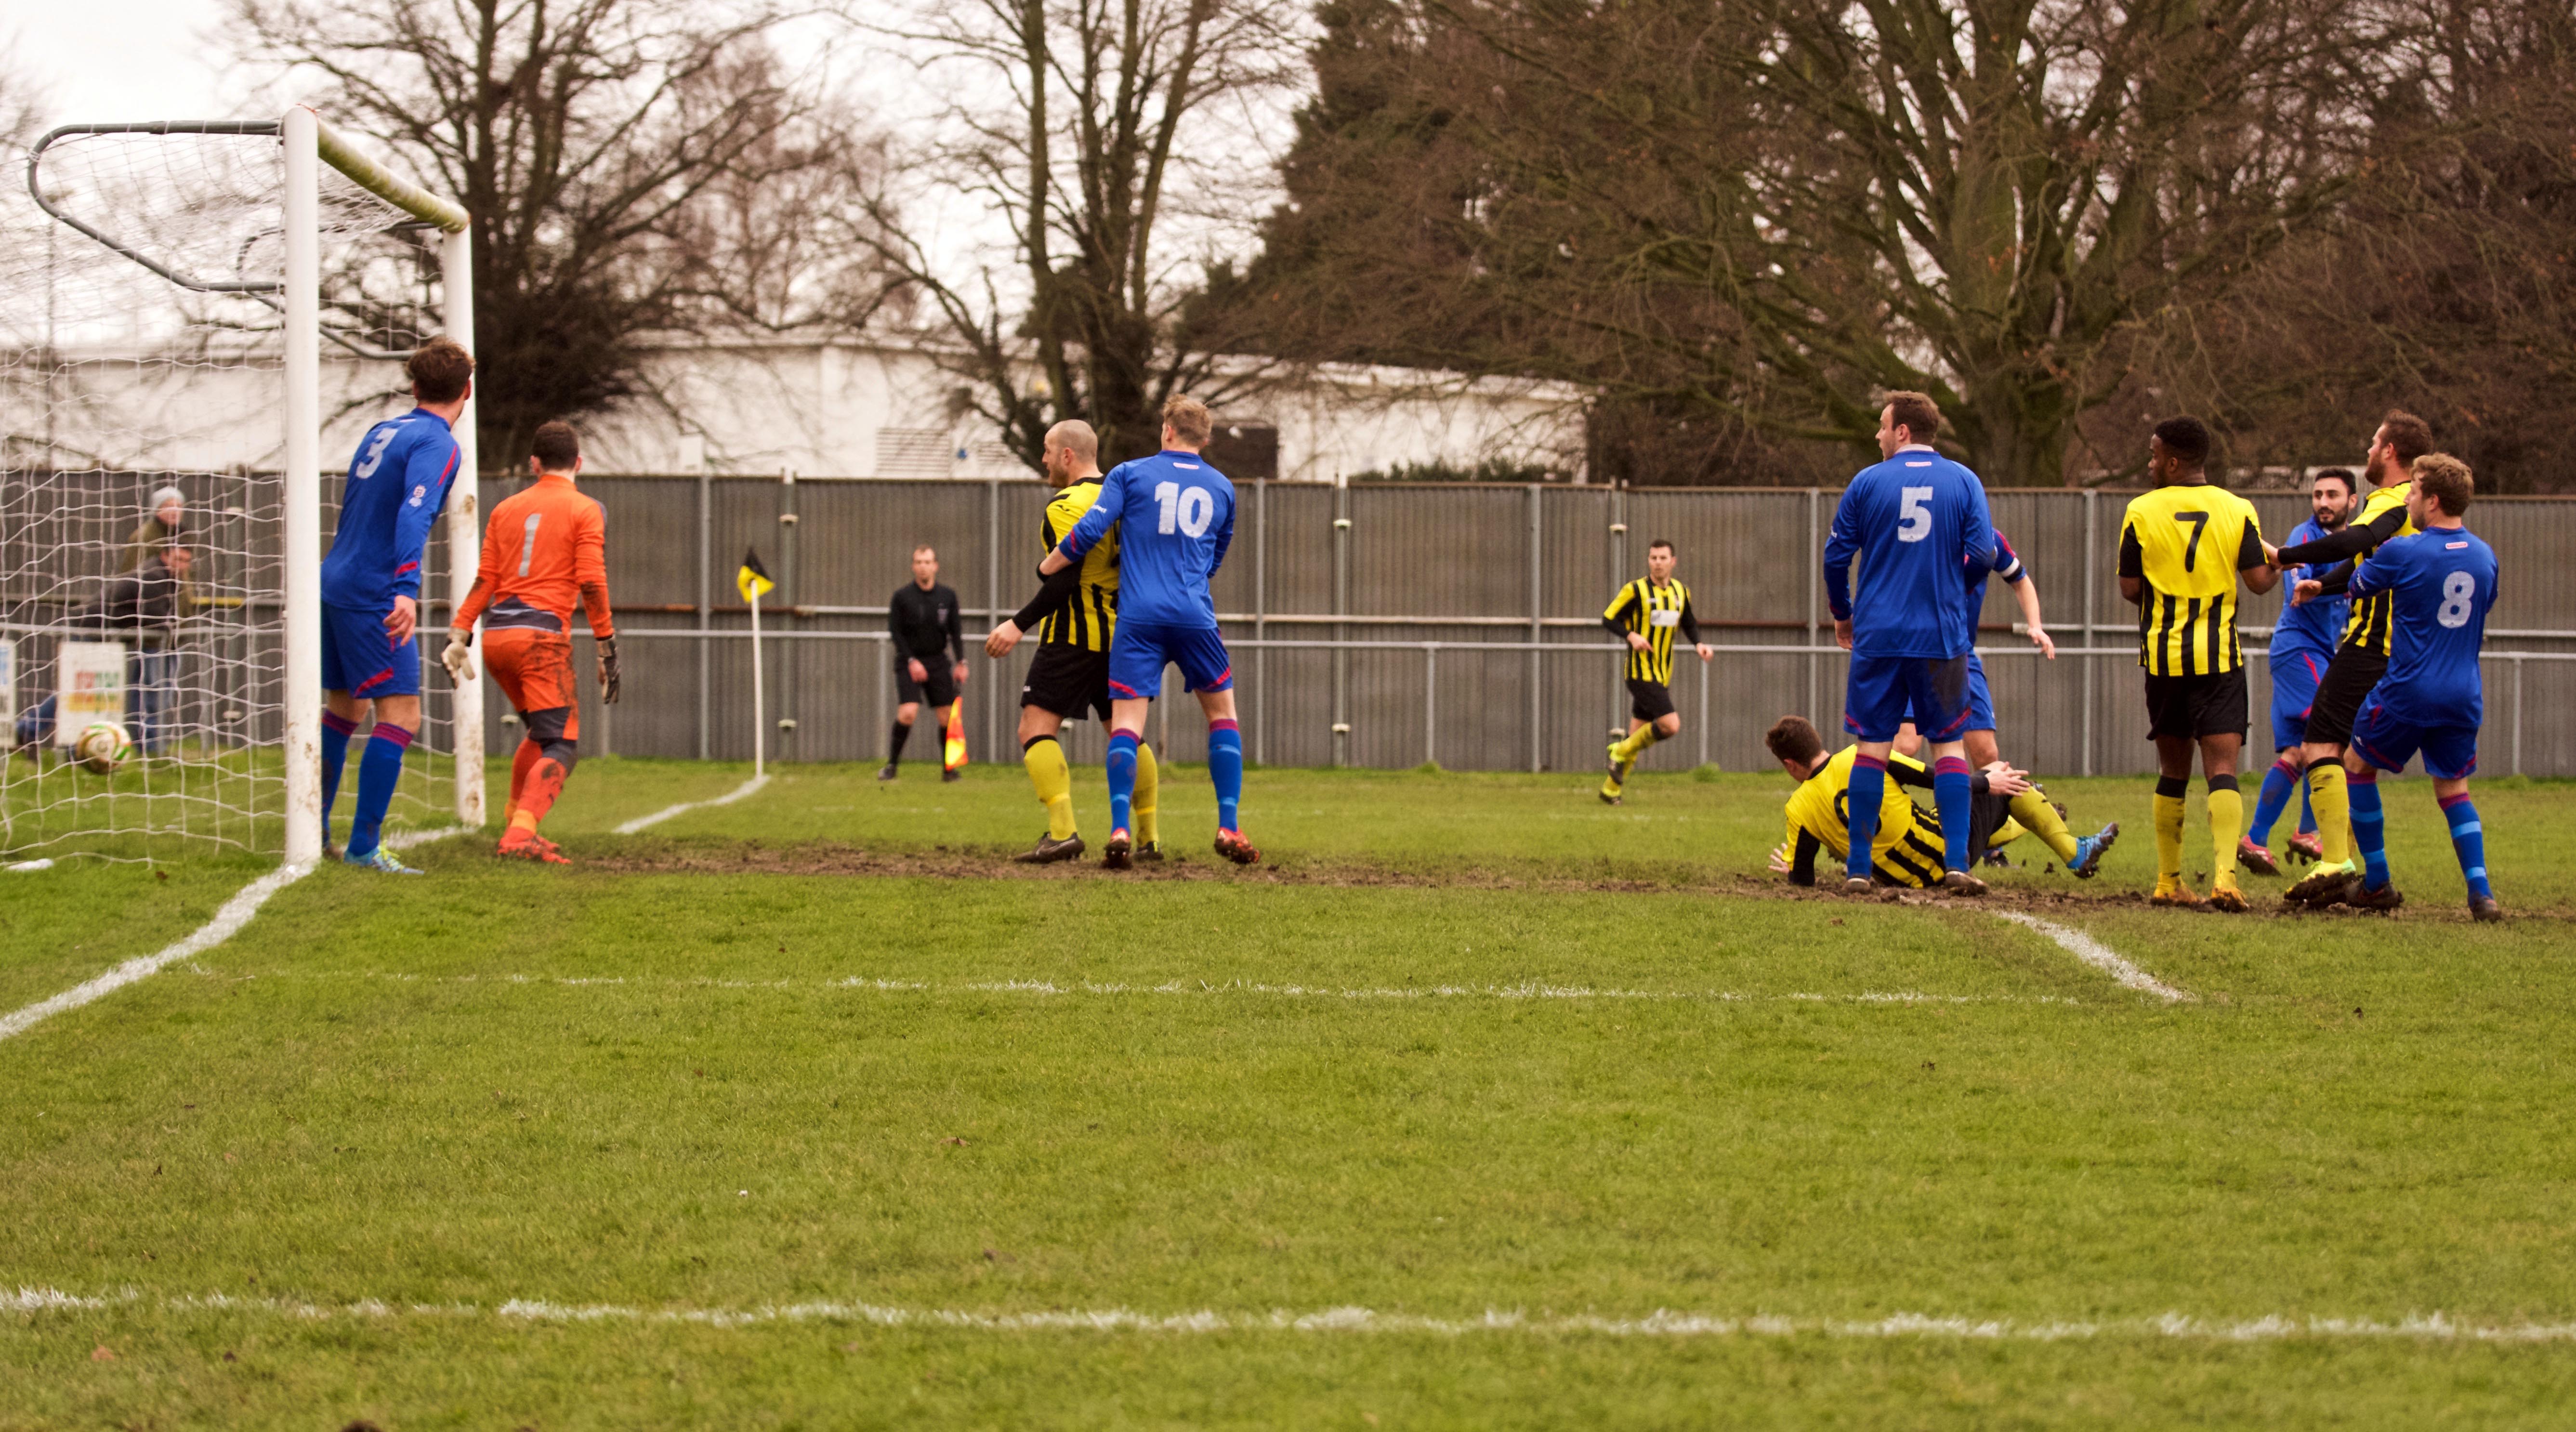 3-0: Stacy Catrwight (on the floor) nets Holbeach's third. Photo by STEVE RELF